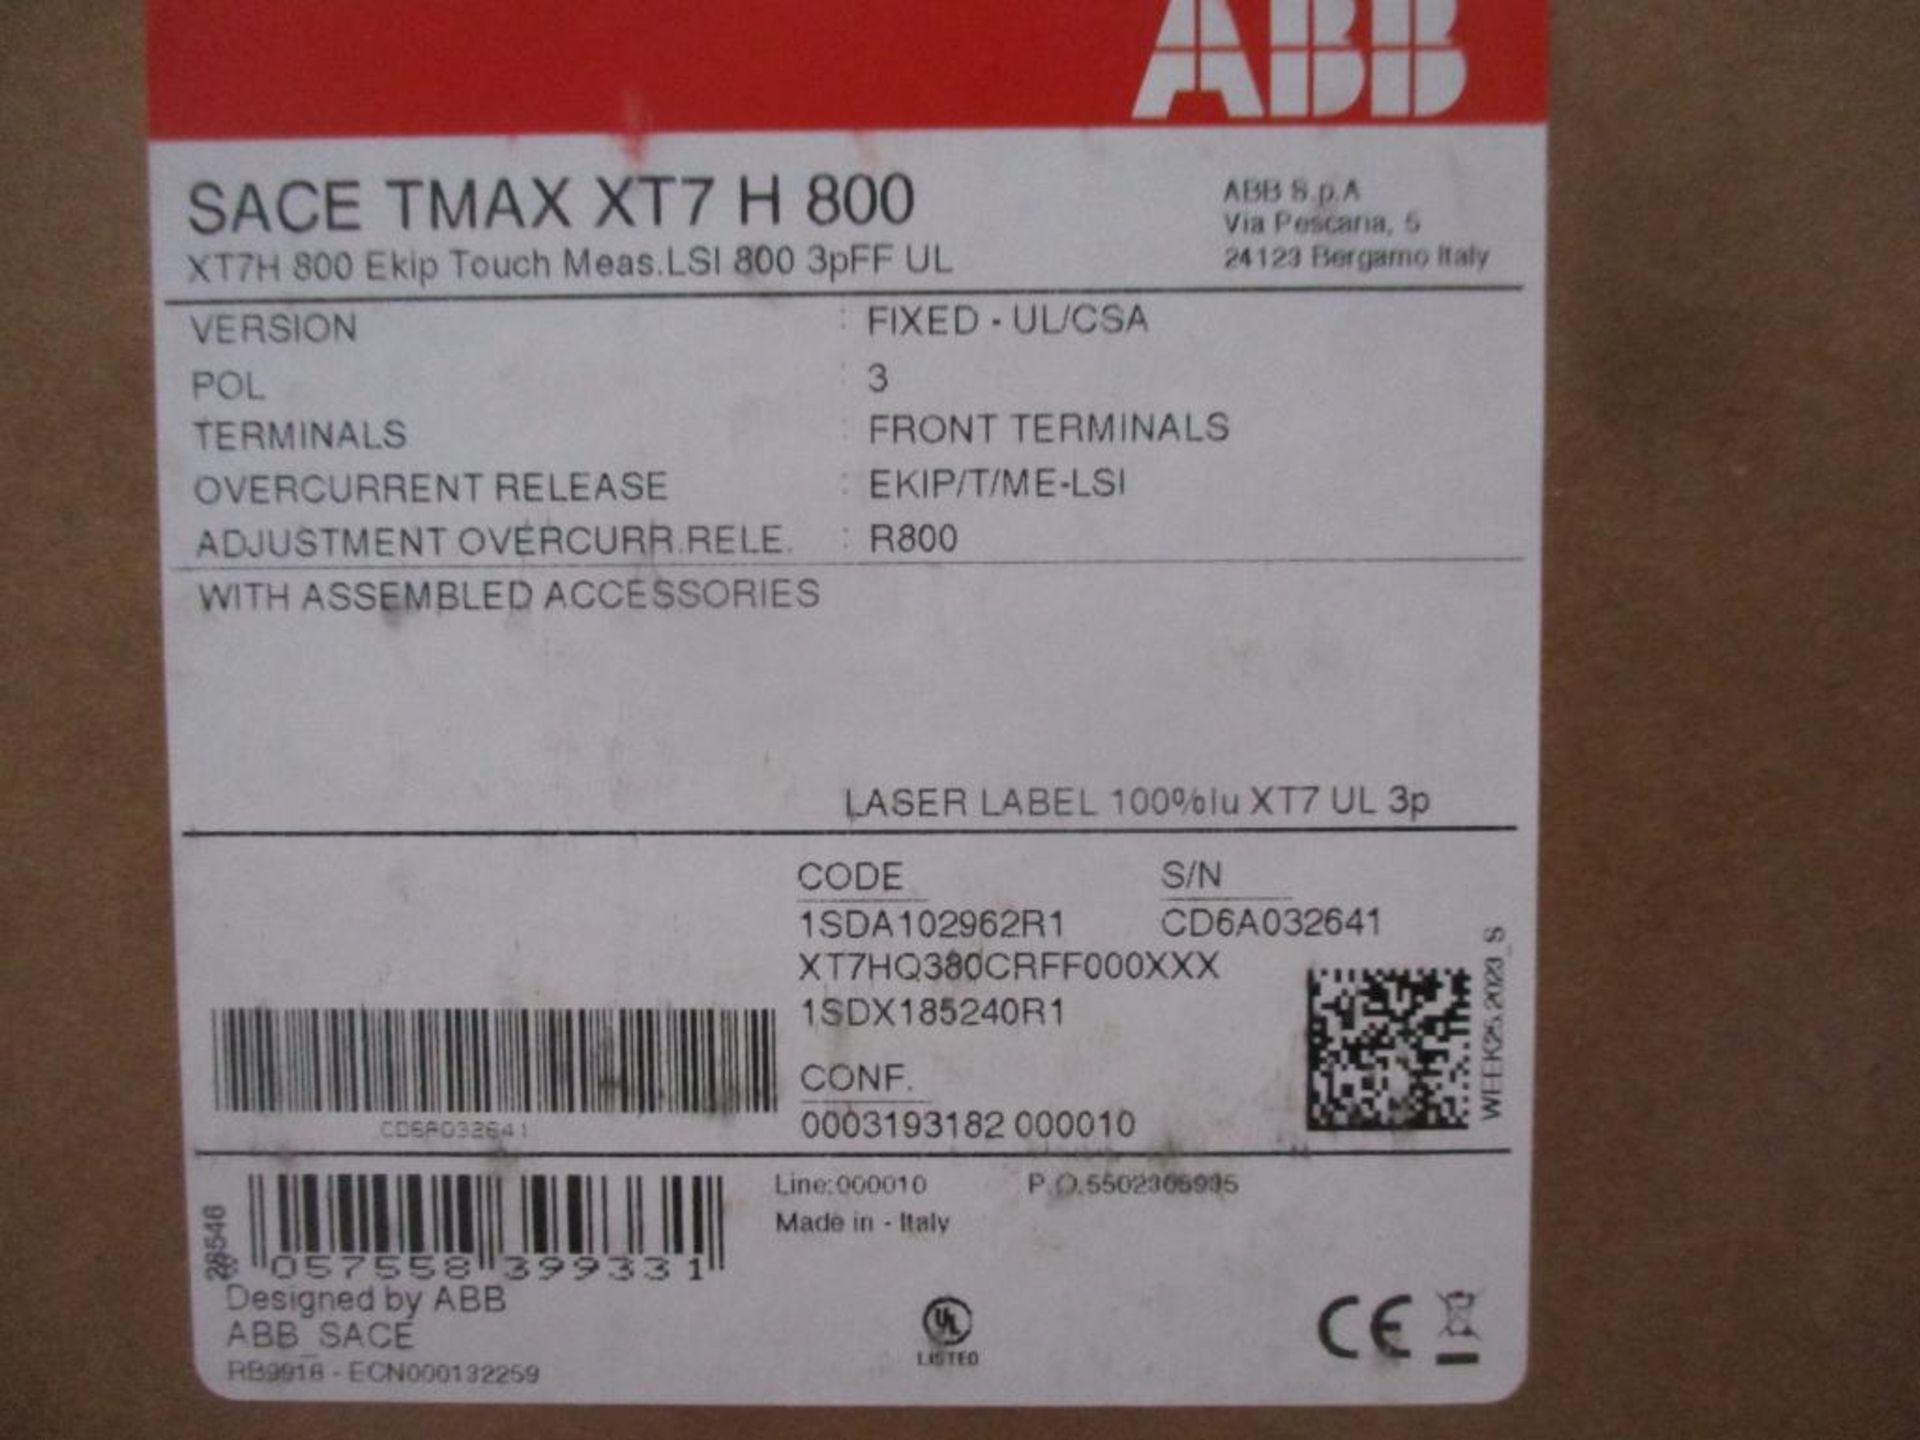 ABB 800 AMP Circuit Breaker, SACE TMAX XT7 H 800, EKIP Touch Measuring LSI 3-Pole (New in Box) - Image 4 of 4